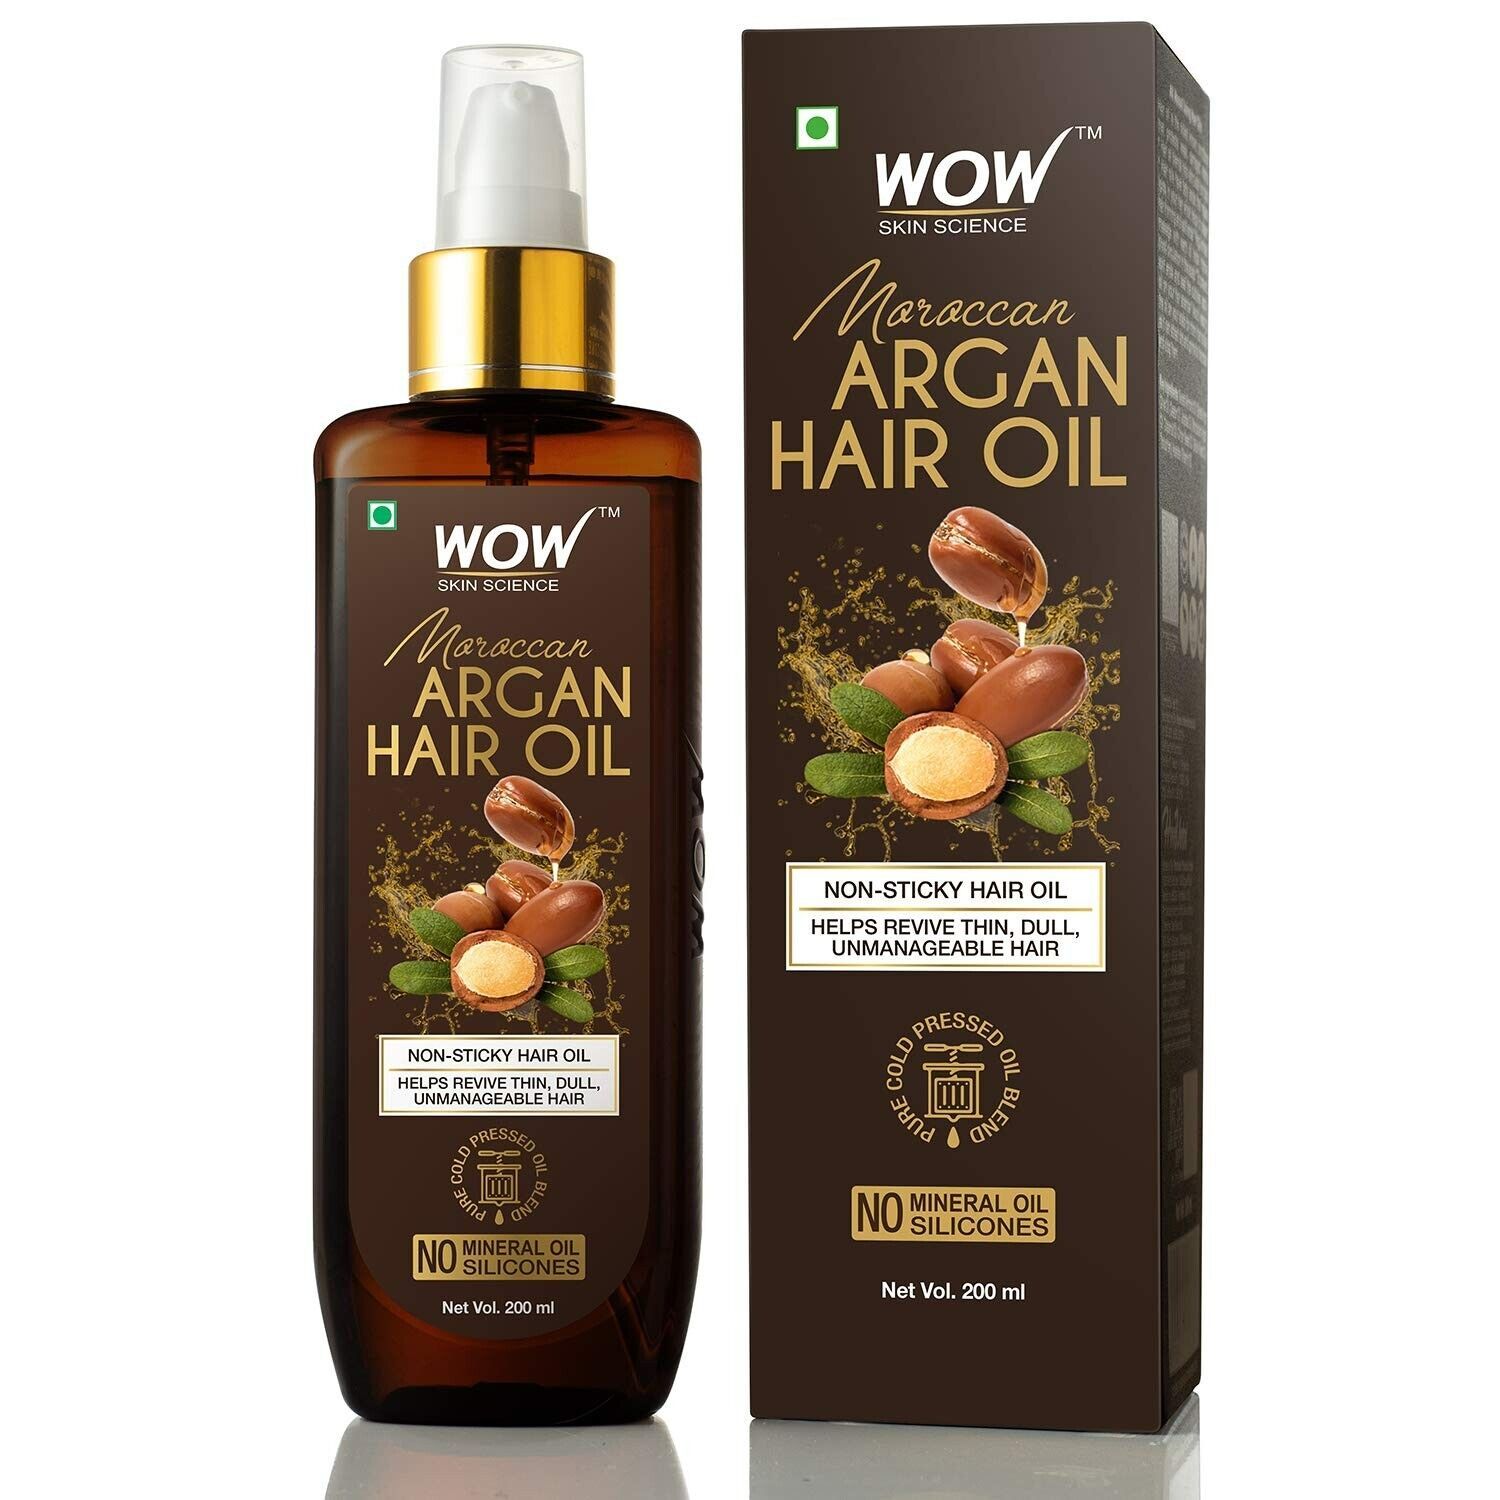 WOW Skin Science Moroccan Argan Hair Growth Oil Non Sticky Stronger Shiny 200ML - $20.89